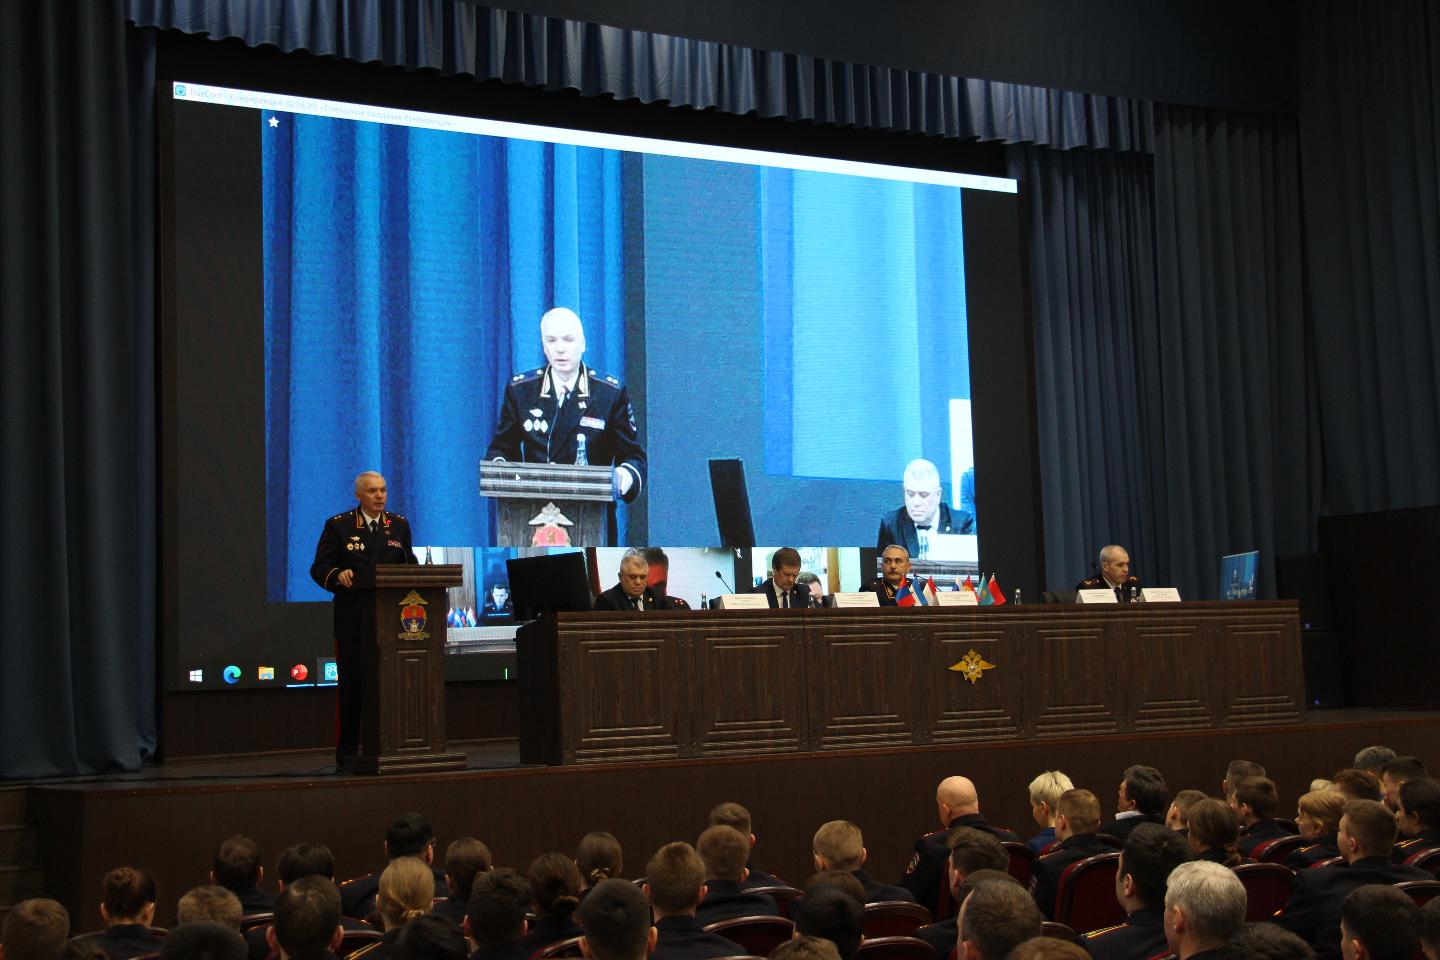 The Siberian Law Institute of the Ministry of Internal Affairs of Russia - the Basic training organization of the CSTO member States held the XXV international scientific-practical conference "Actual problems of the fight against crime: issues of theory a